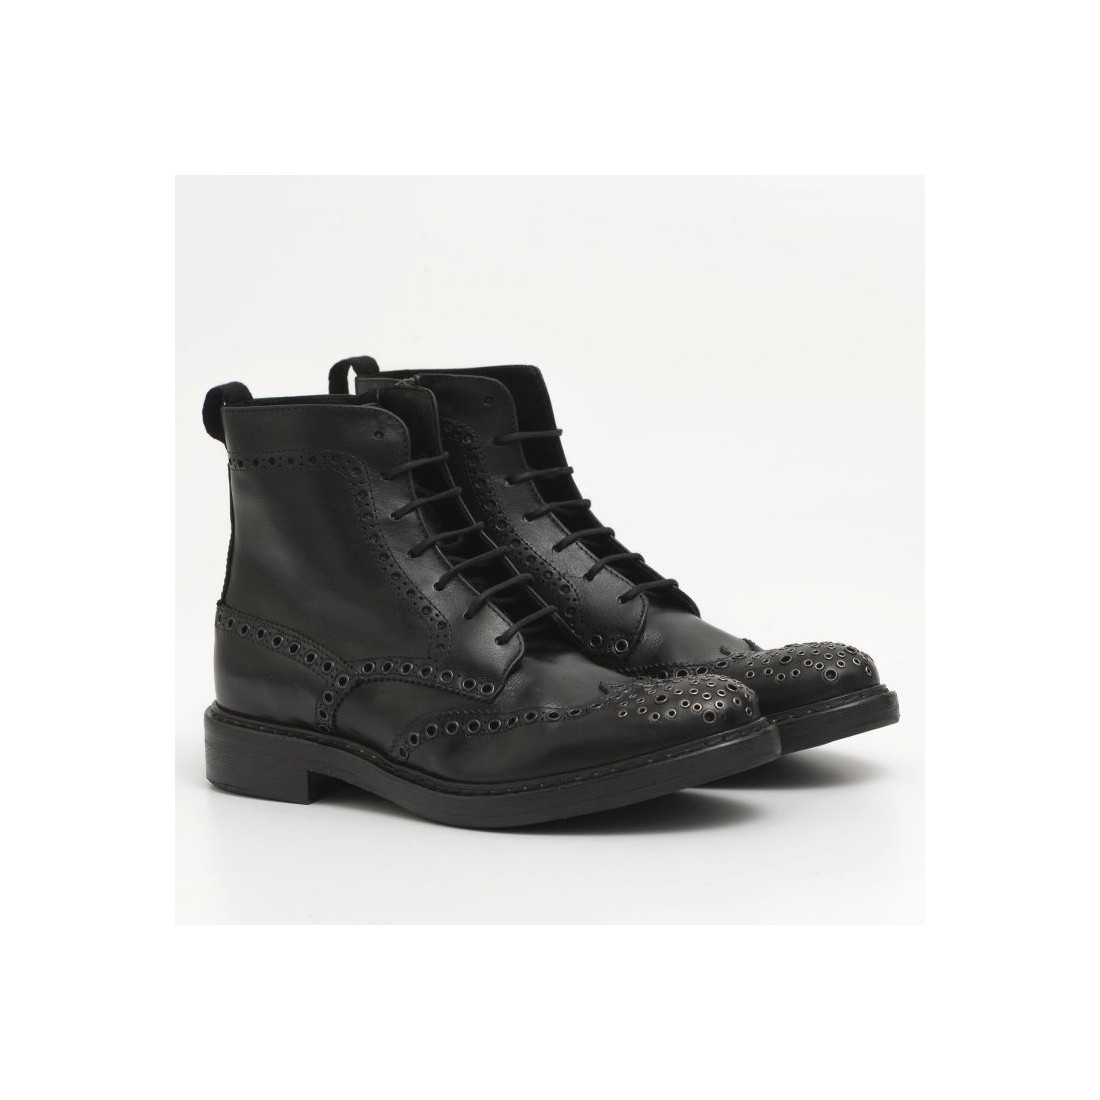 High top lace up shoes in black leather with studs